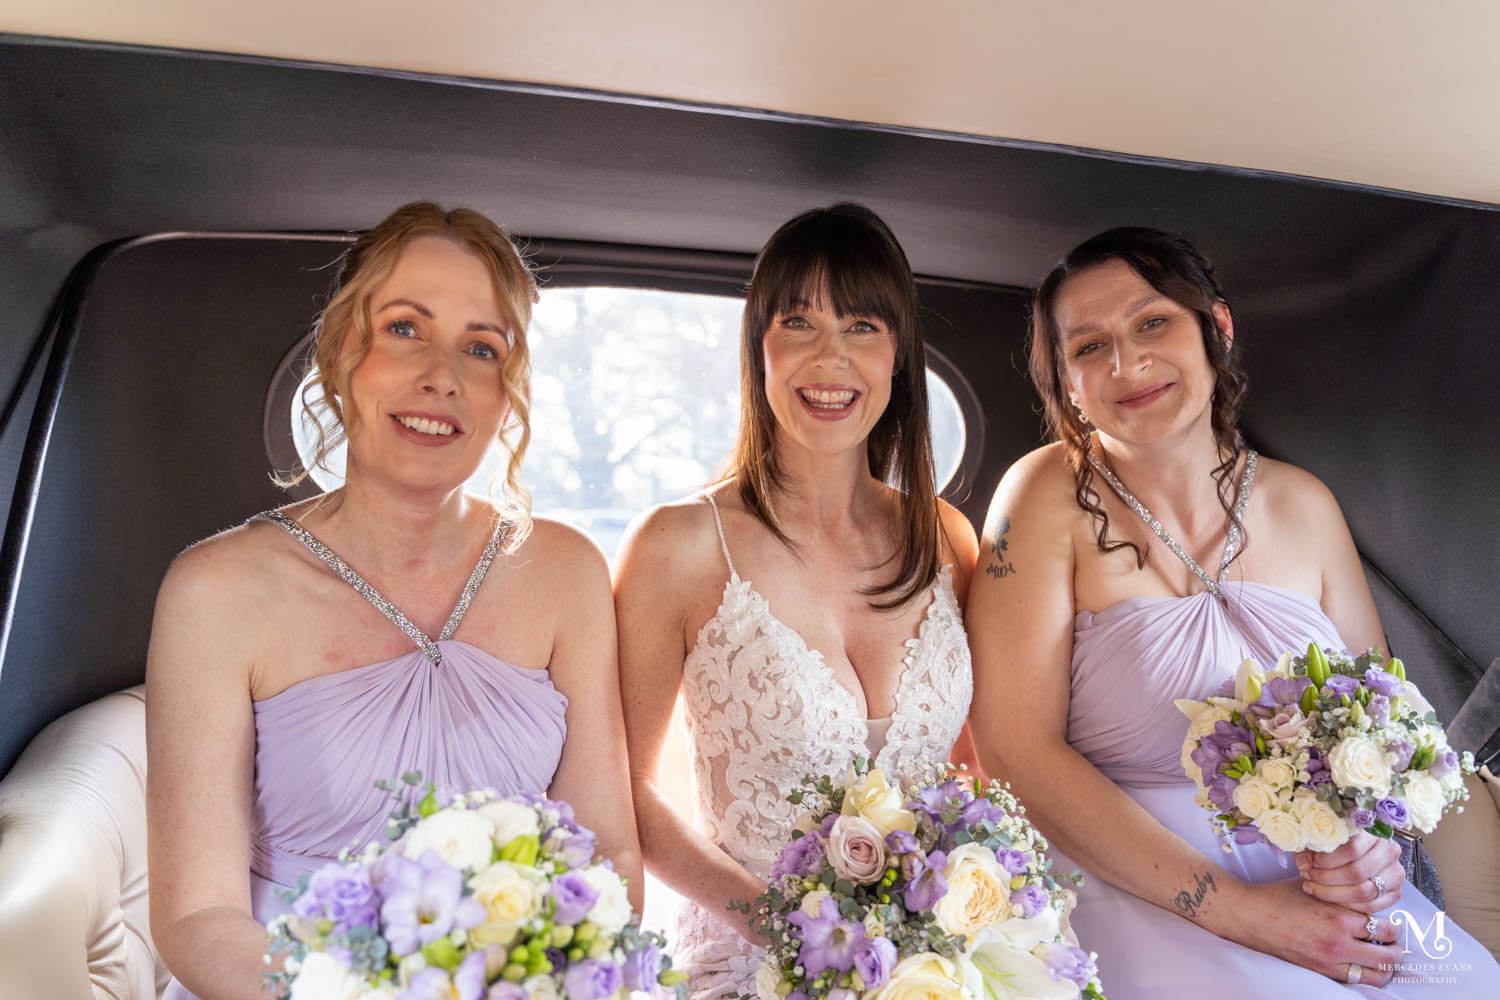 The bride and her bridesmaids sit smiling in the vintage wedding car